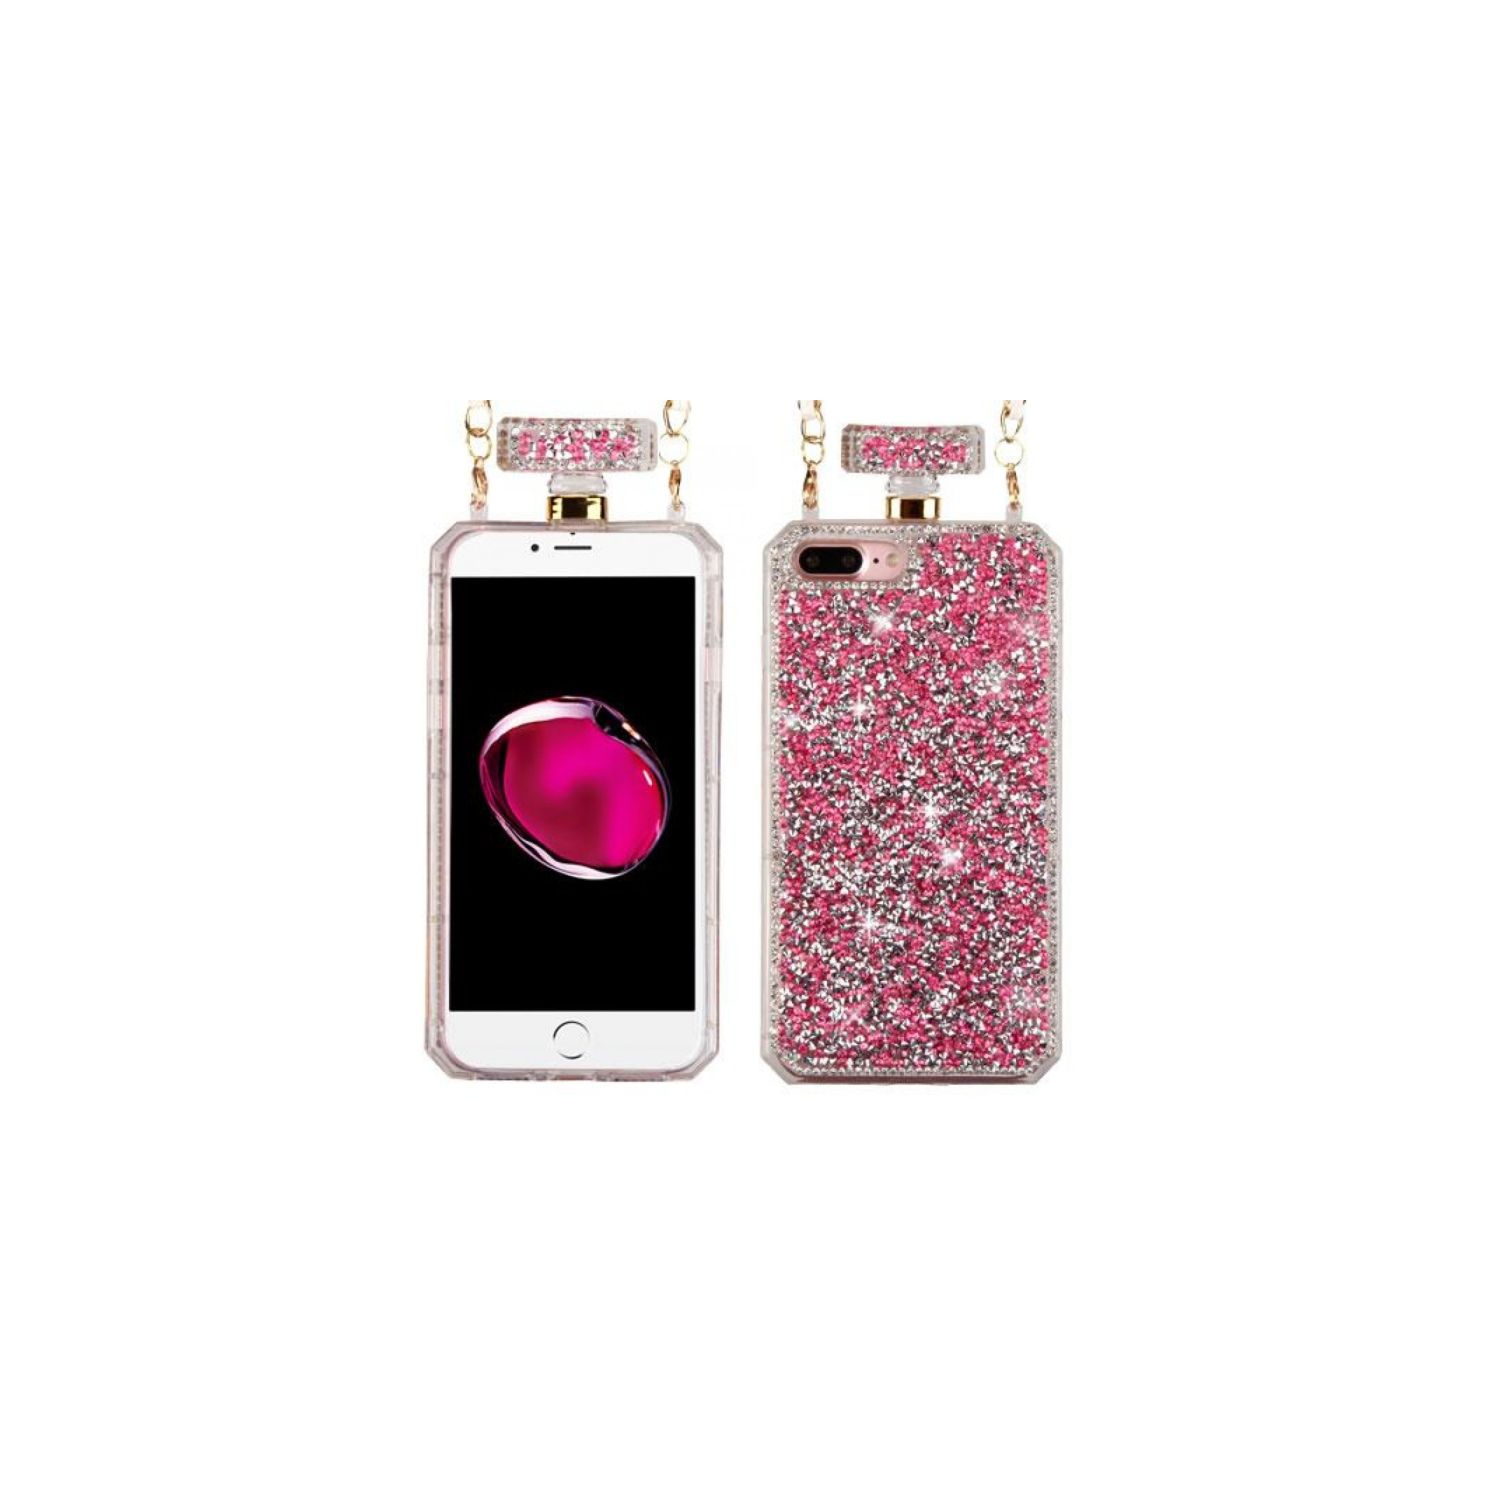 APPLE IPHONE 8/7 (5.5) HOT PINK MINI CRYSTALS DIAMANTE PERFUME BOTTLE CANDY SKIN